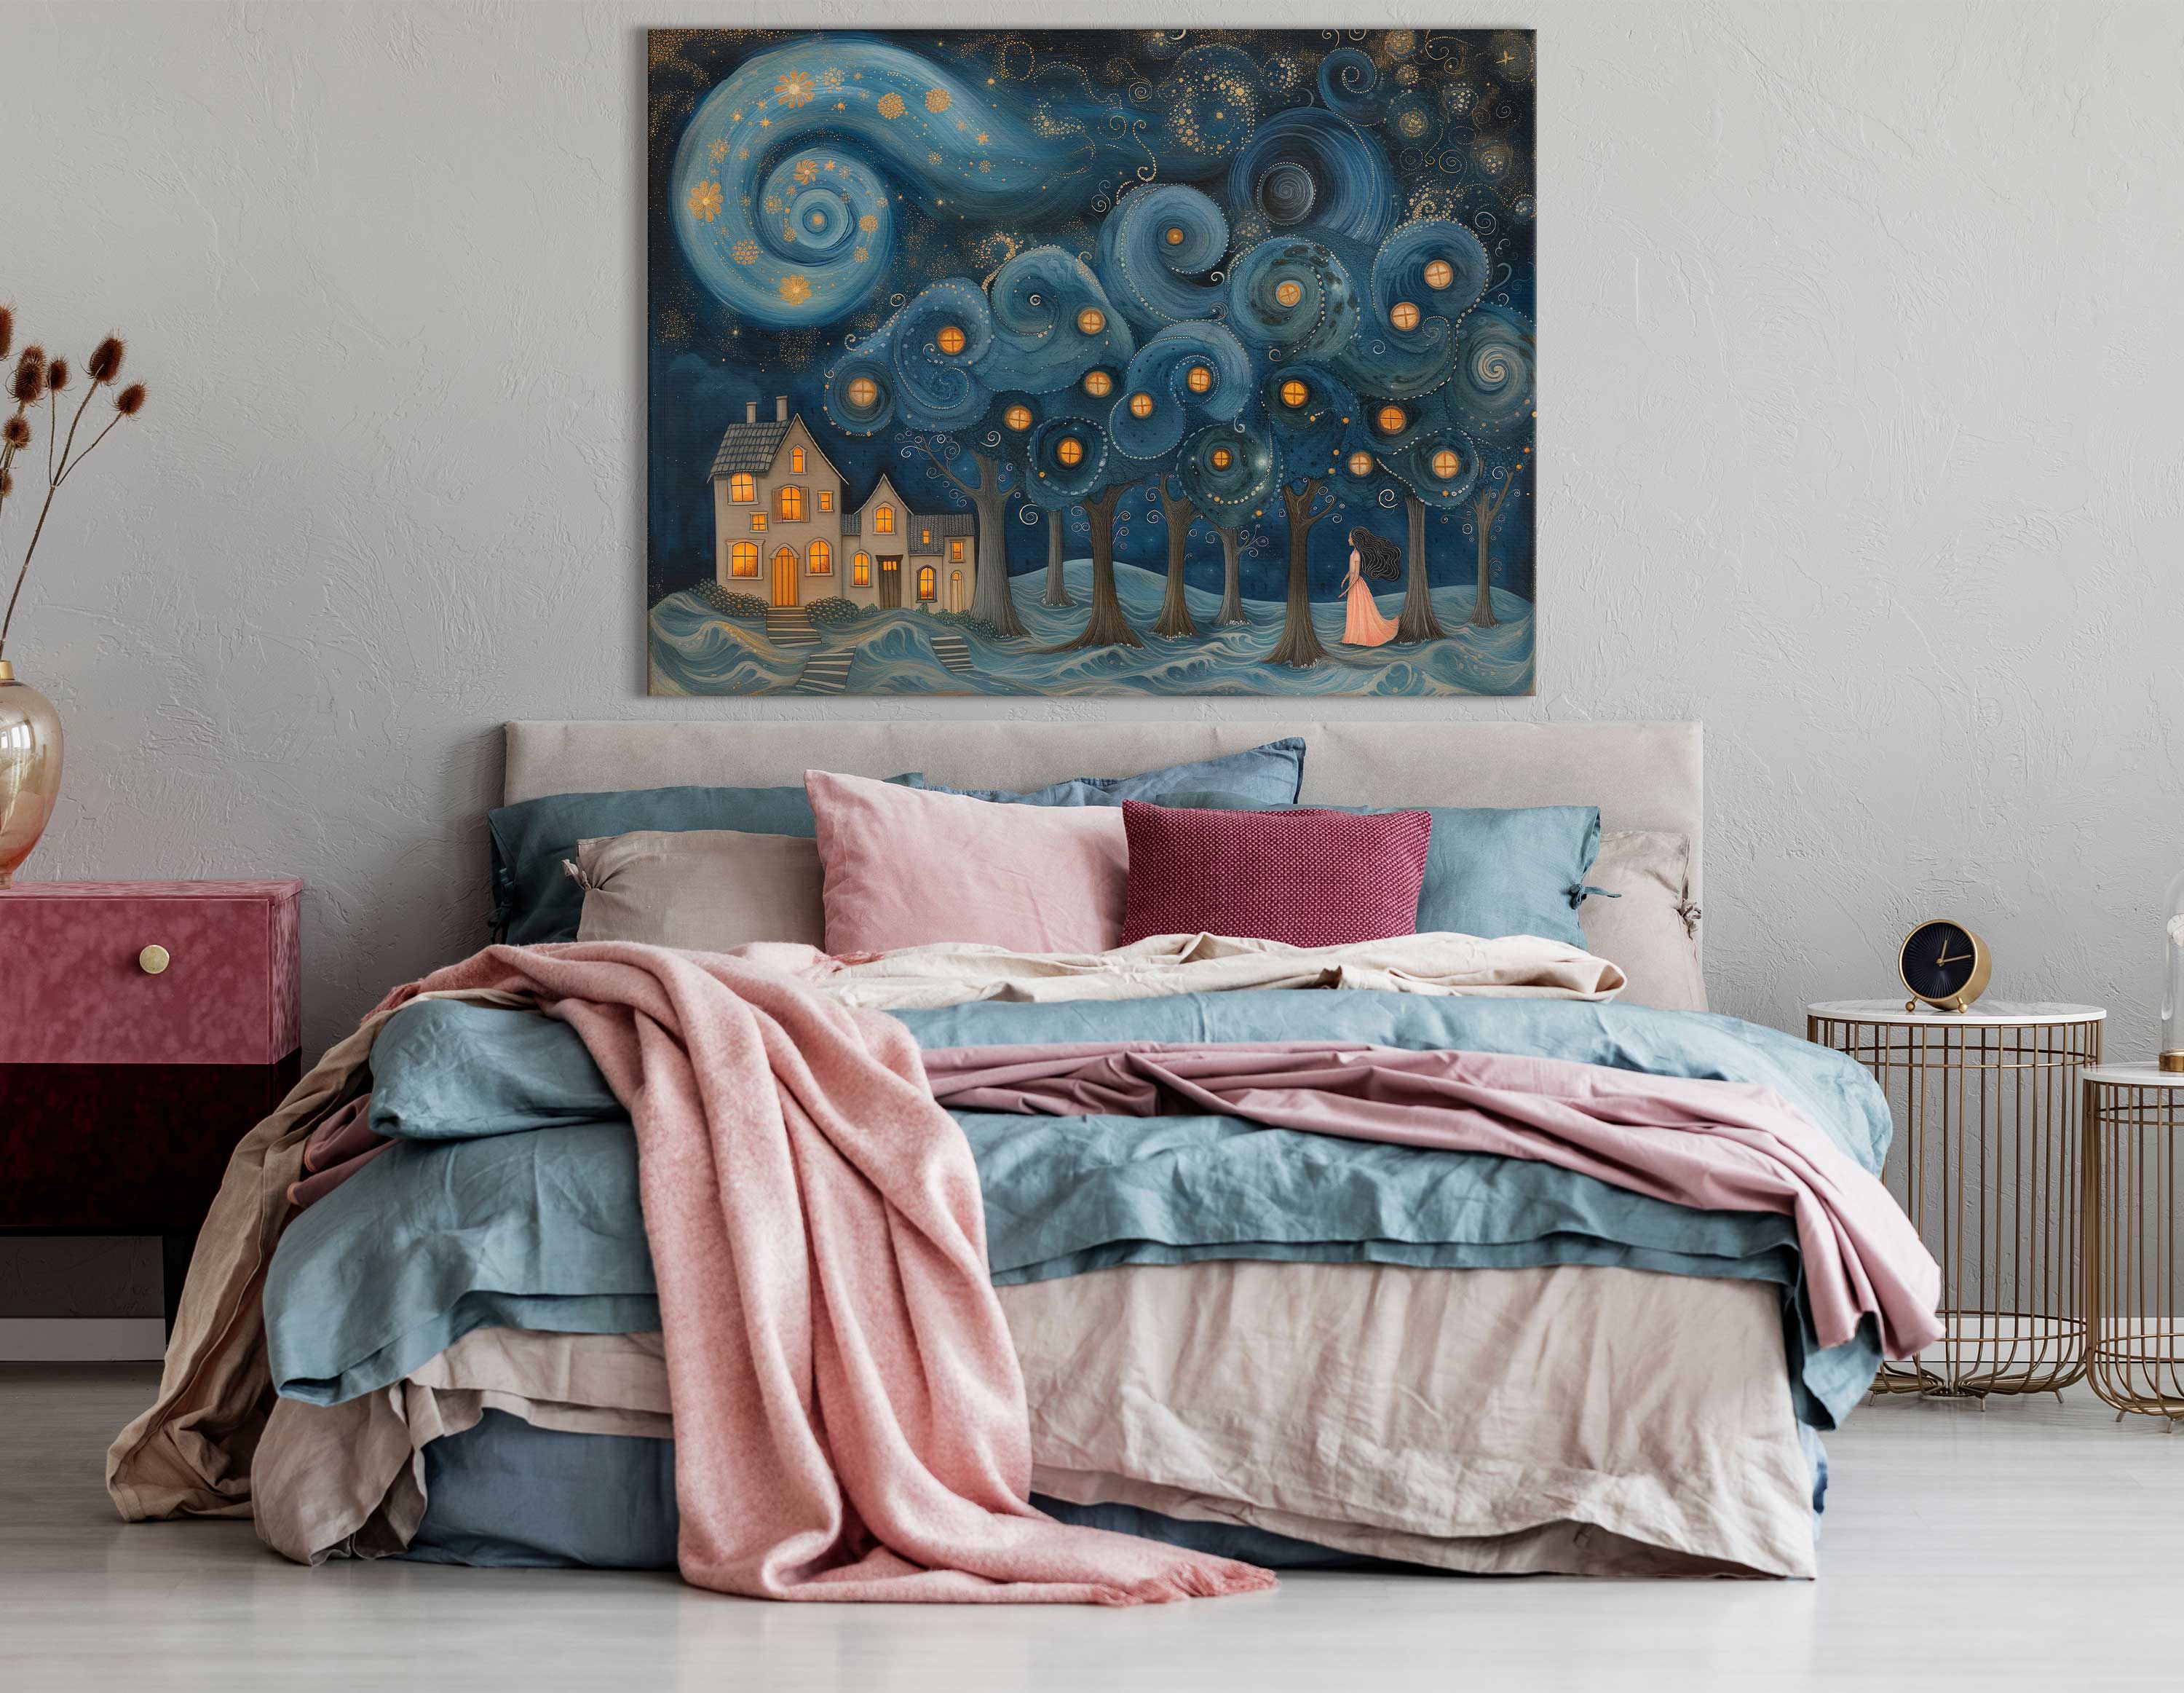 Magical Swirling Skies Over House Wall Decor